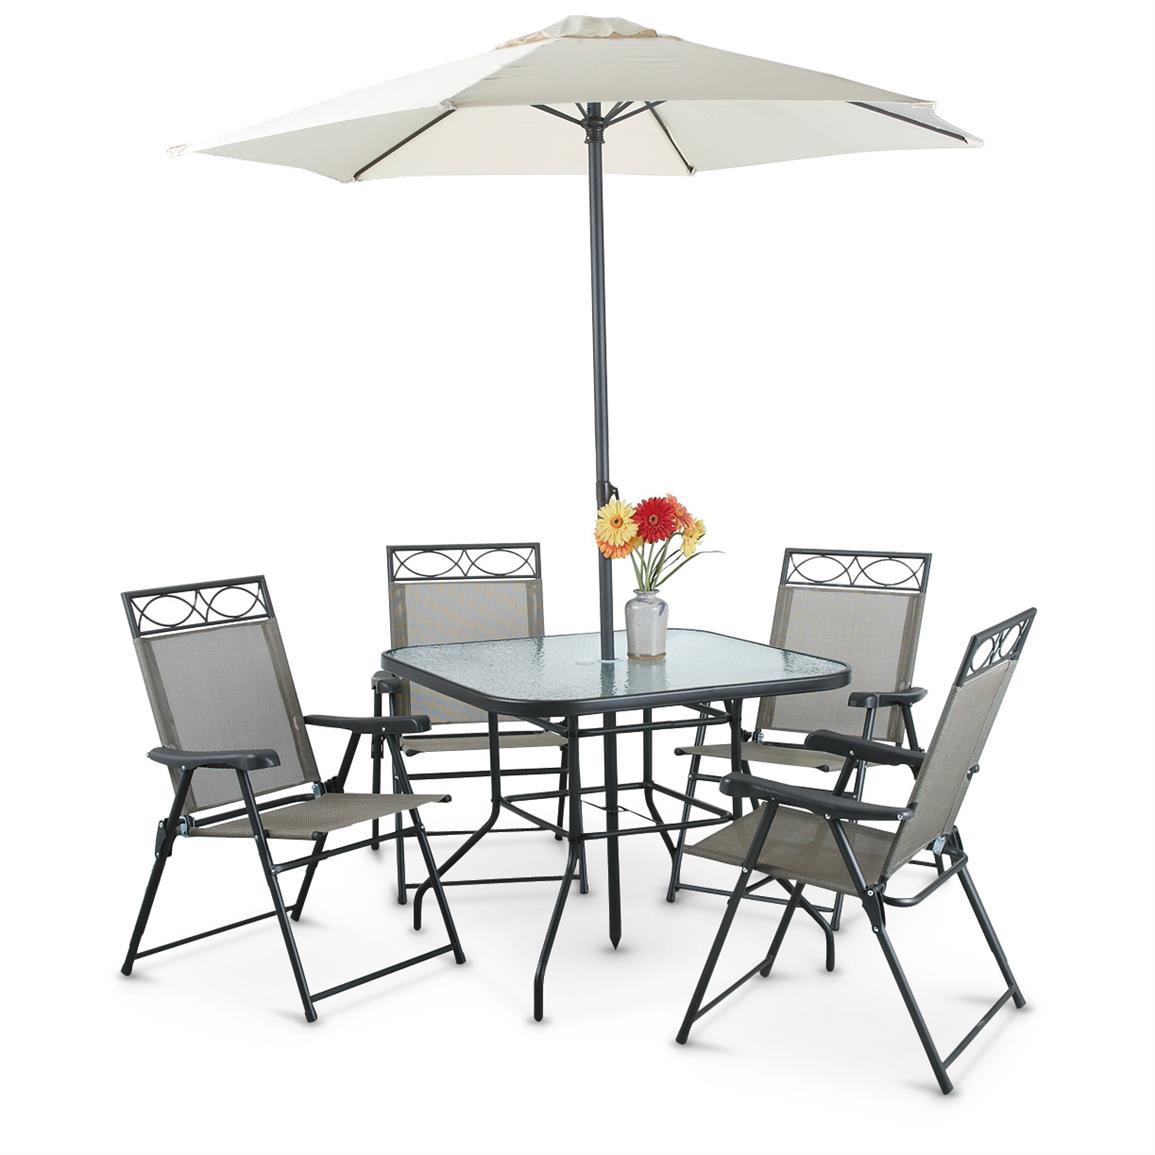 Deluxe Outdoor Patio Dining Set, 6 Piece  617279, Patio Furniture at Sportsman\u002639;s Guide